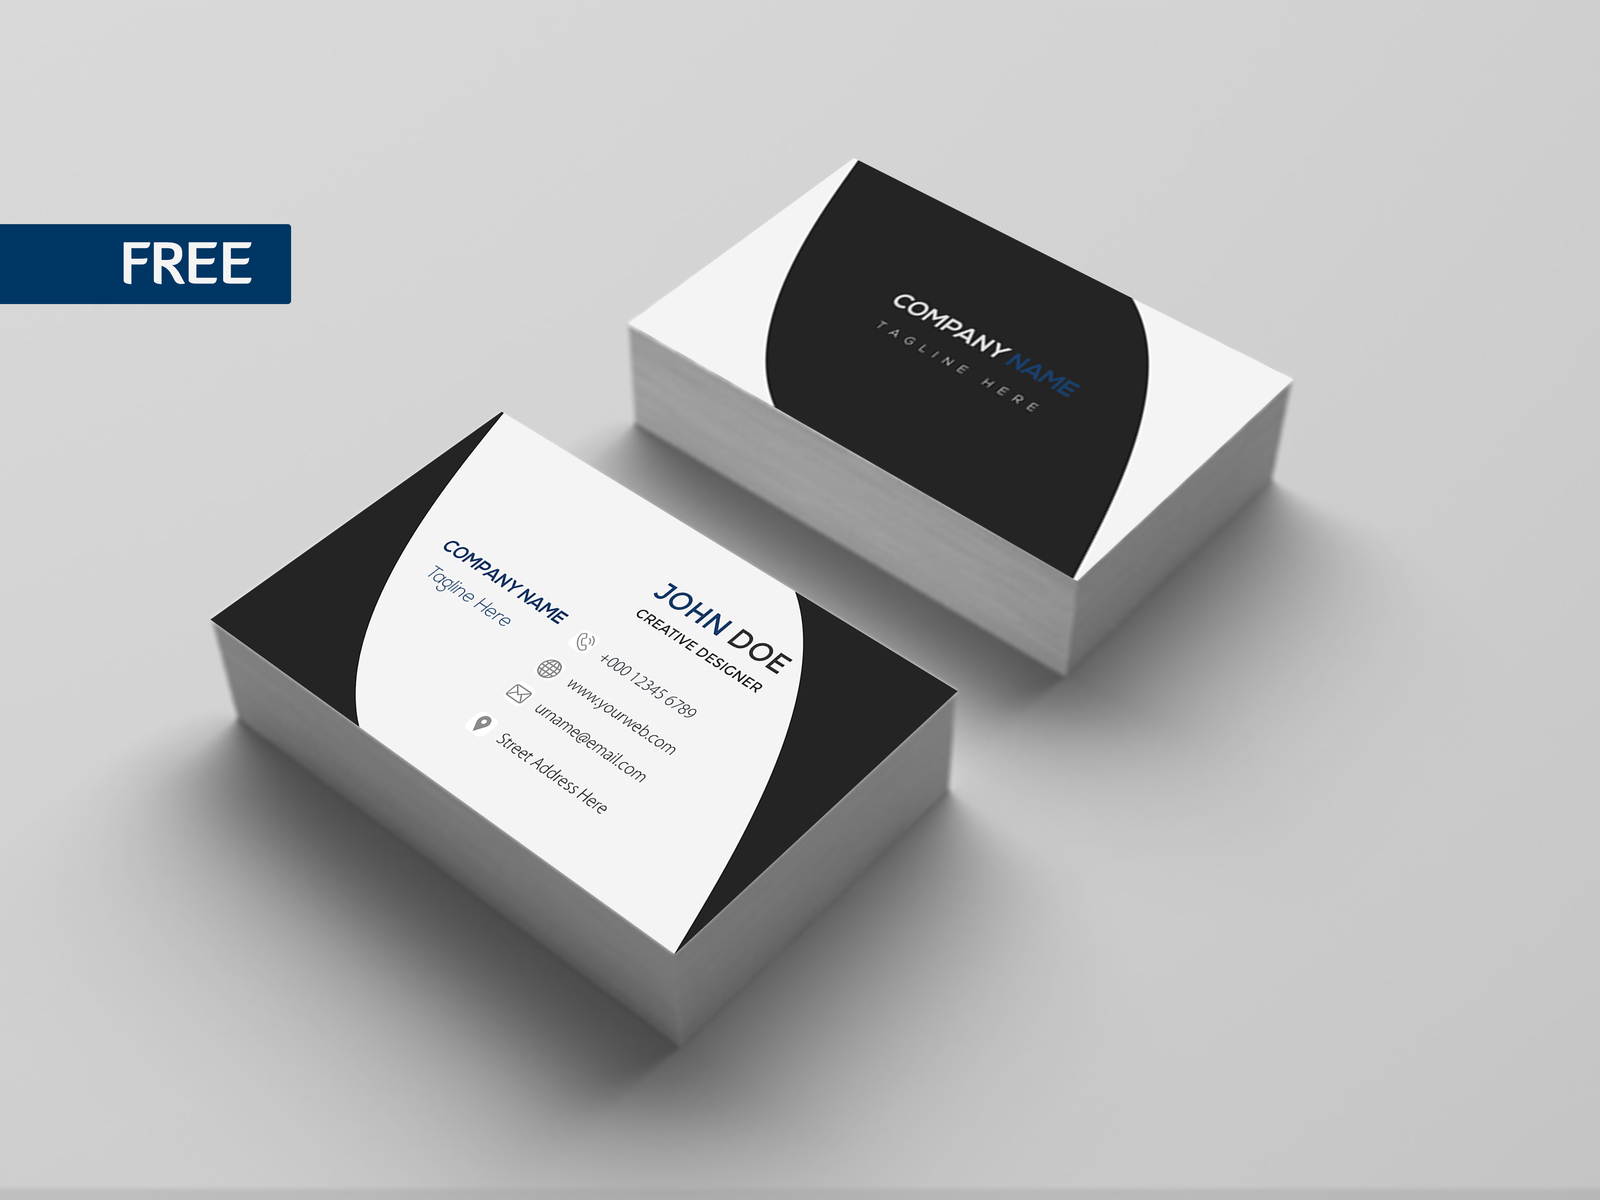 FREE Business card Template (23) by Syeda Junia on Dribbble With Regard To Free Complimentary Card Templates